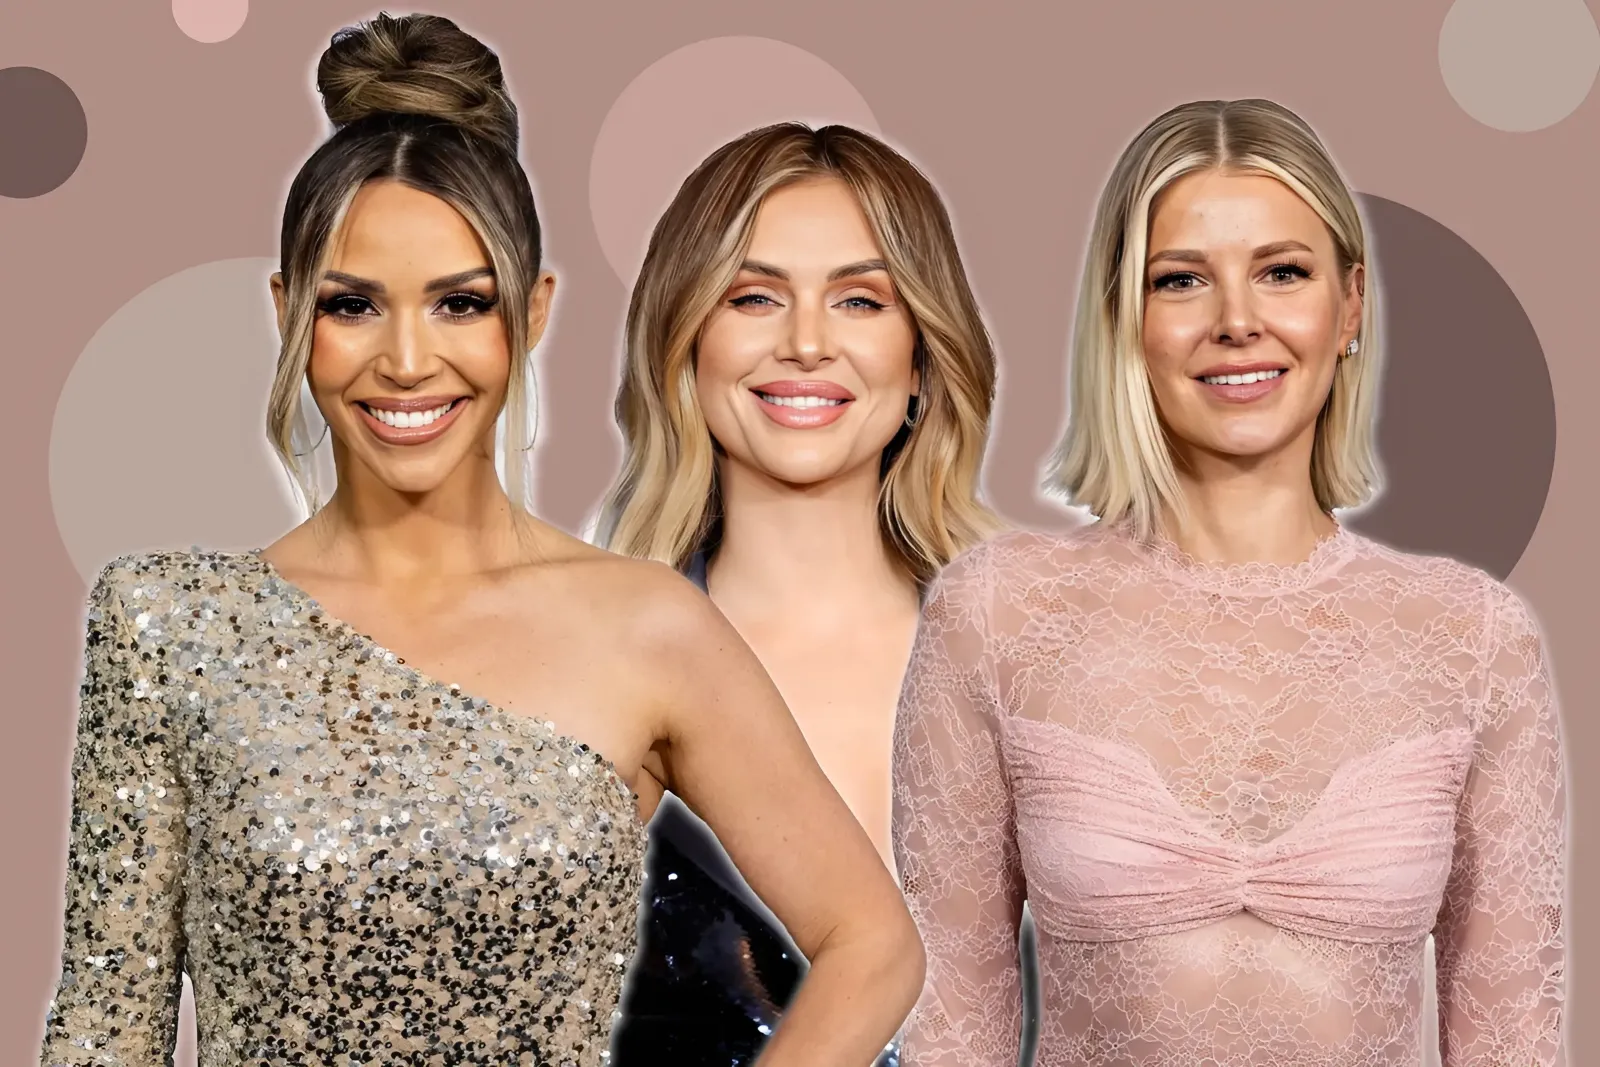 The narrative about motherhood on ‘Vanderpump Rules’ is entirely wrong